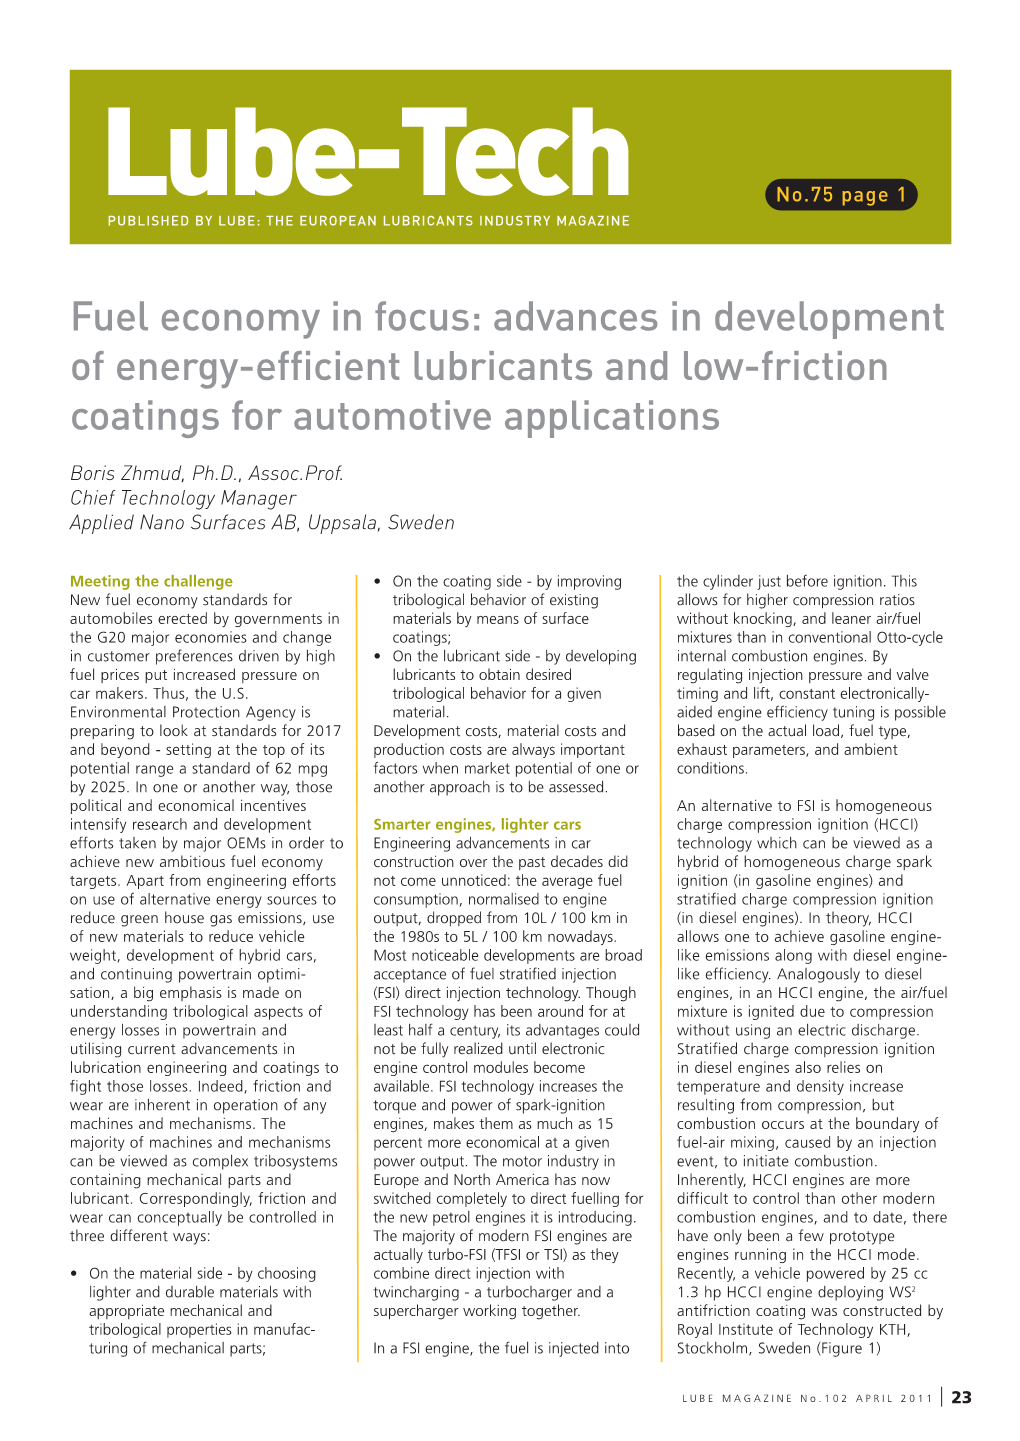 Fuel Economy in Focus: Advances in Development of Energy-Efficient Lubricants and Low-Friction Coatings for Automotive Applications